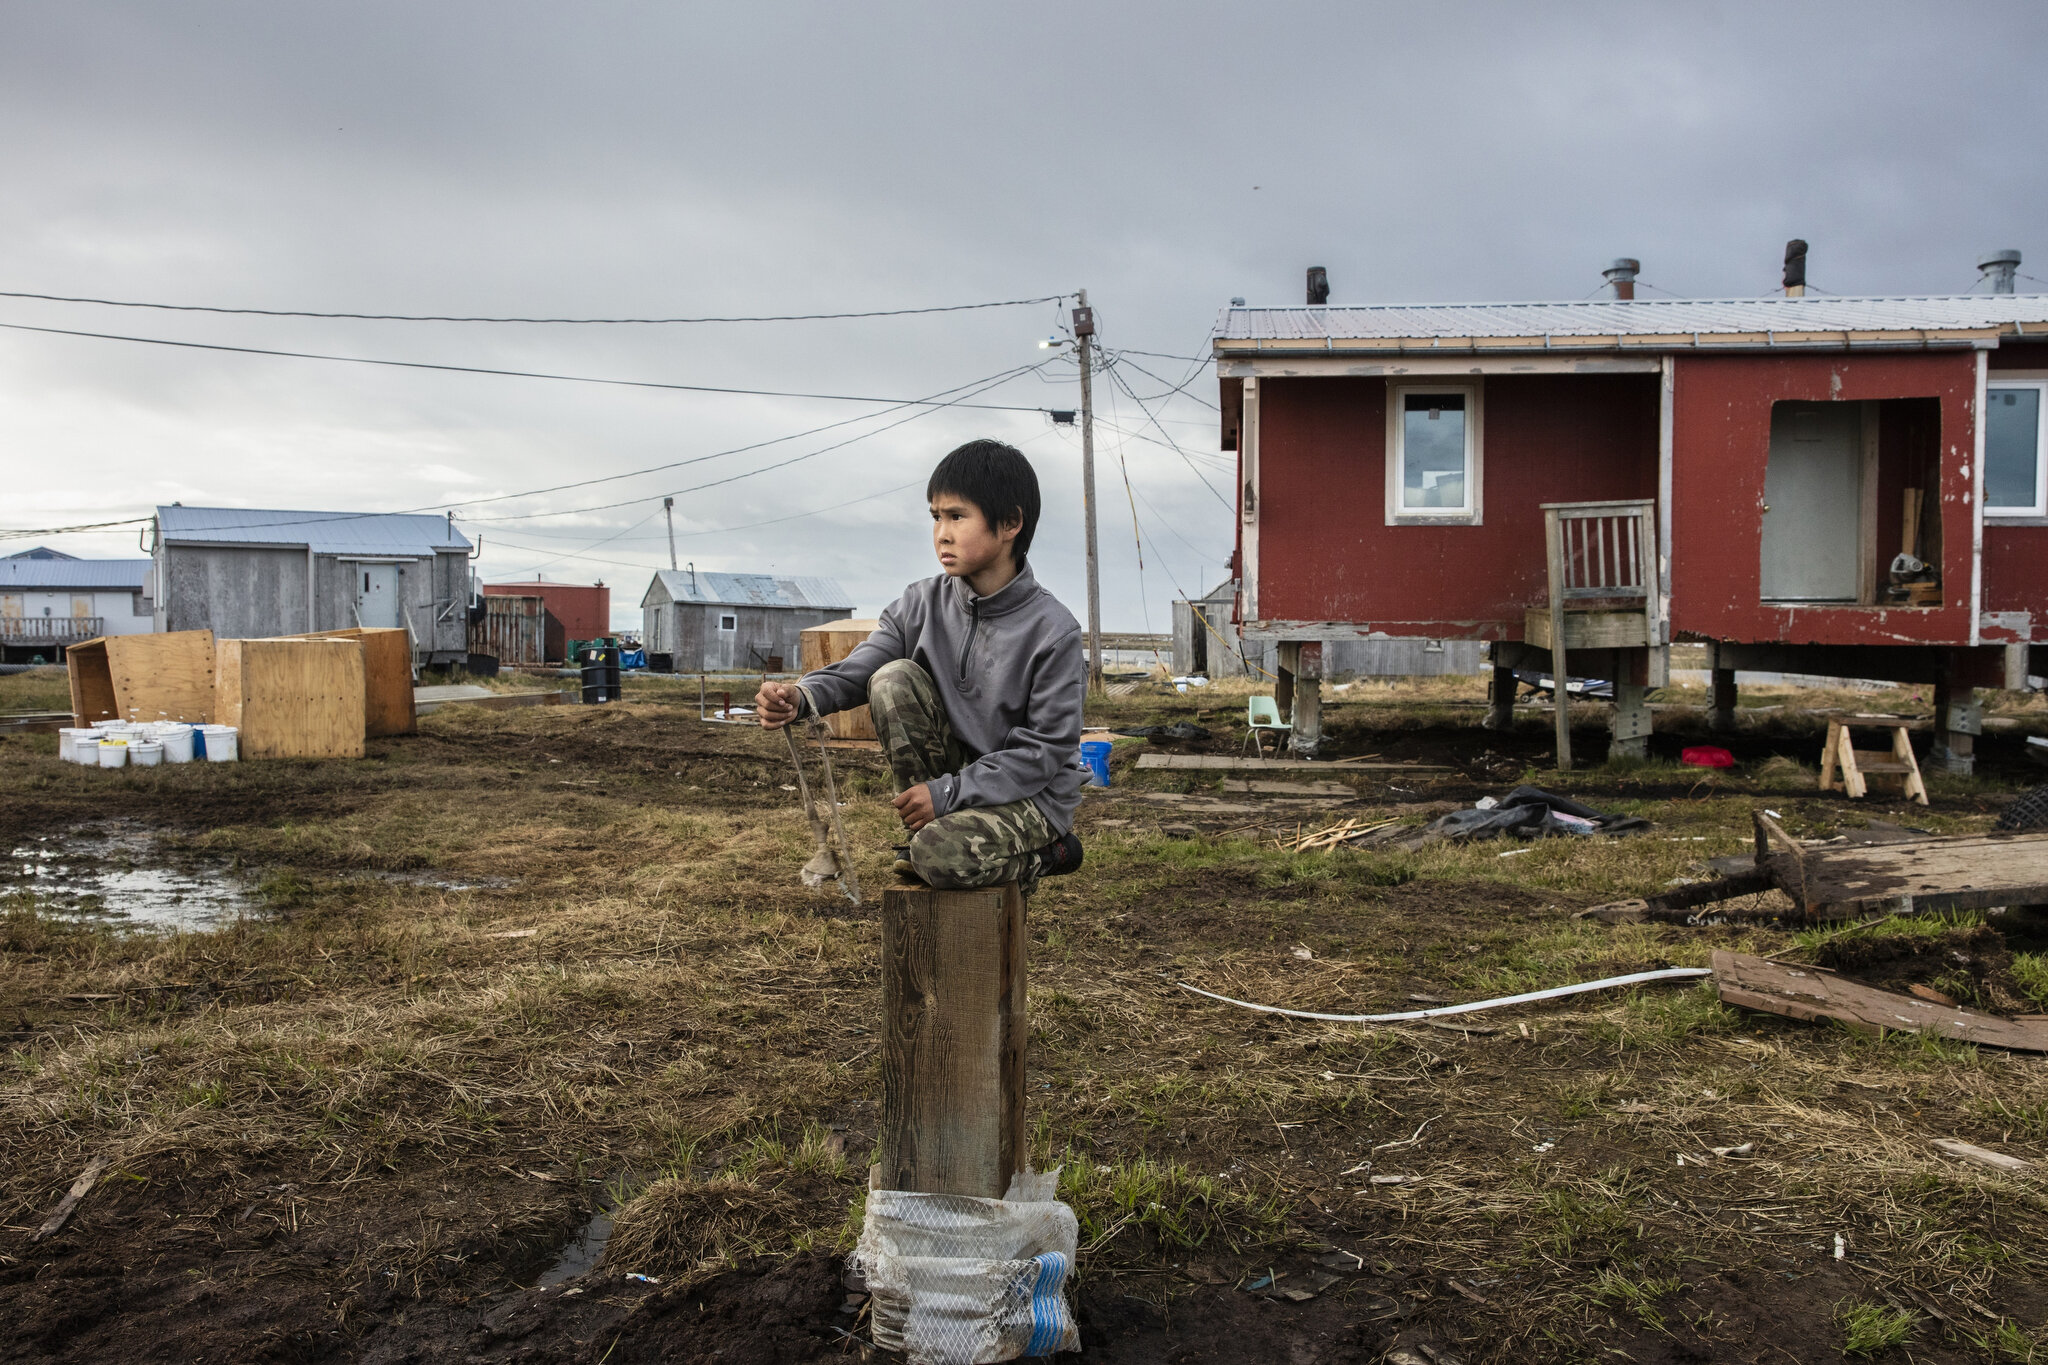  Reese John plays with his slingshot on a piling from a recently demolished home in Newtok, Alaska. May 28th, 2019. Just a few dozen feet away are crumbling cliffs of permafrost falling into the Ninglik River. Erosion has already gobbled up approxima